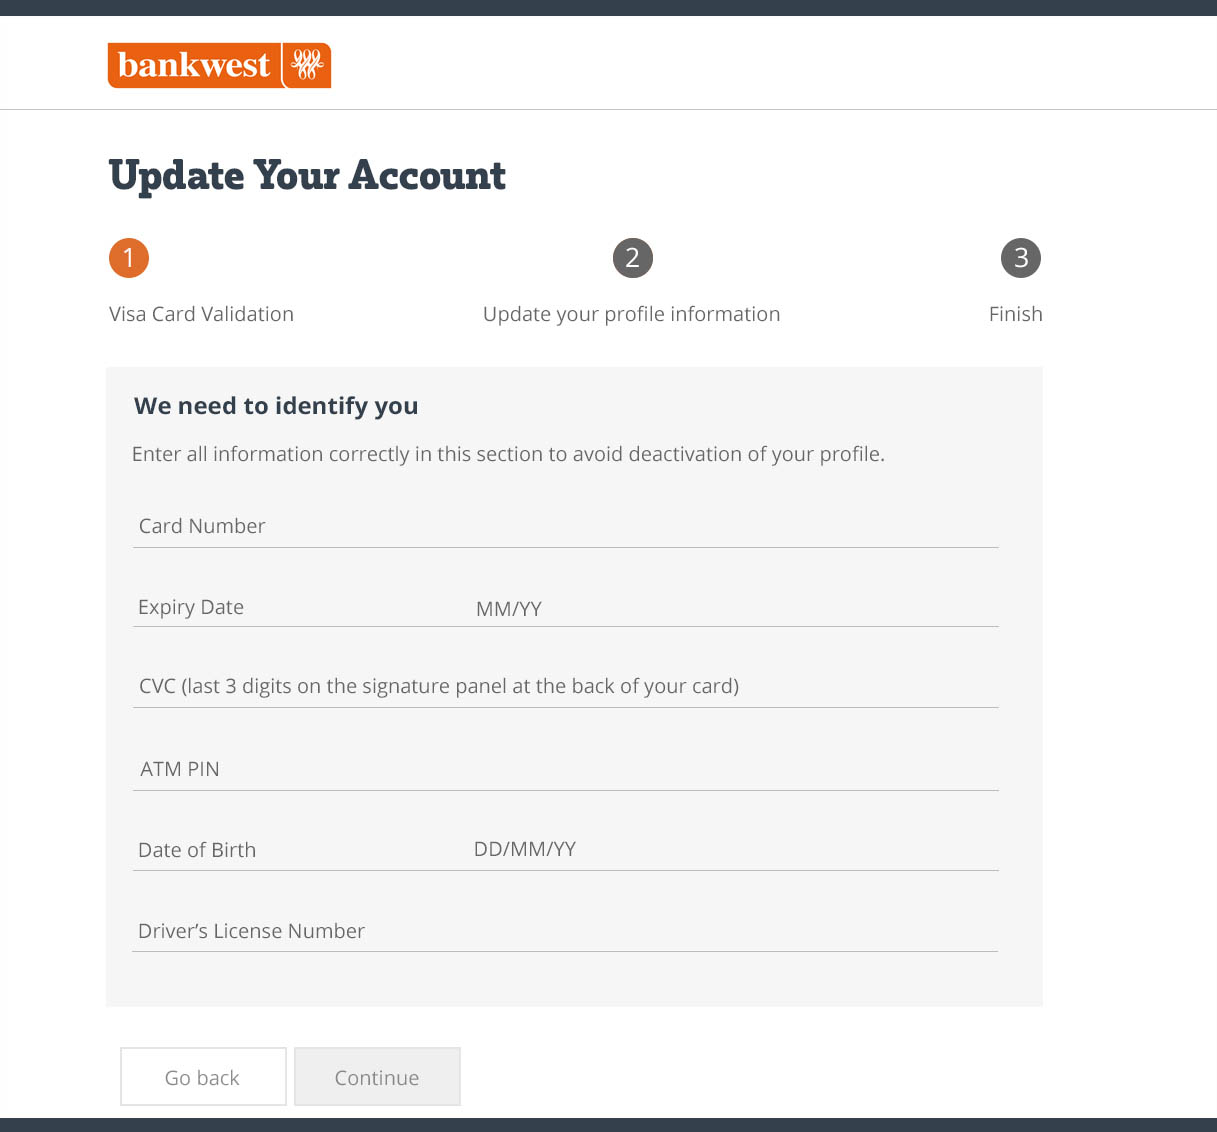 Image example of a fake 'Update Your Account' form asking for your card information